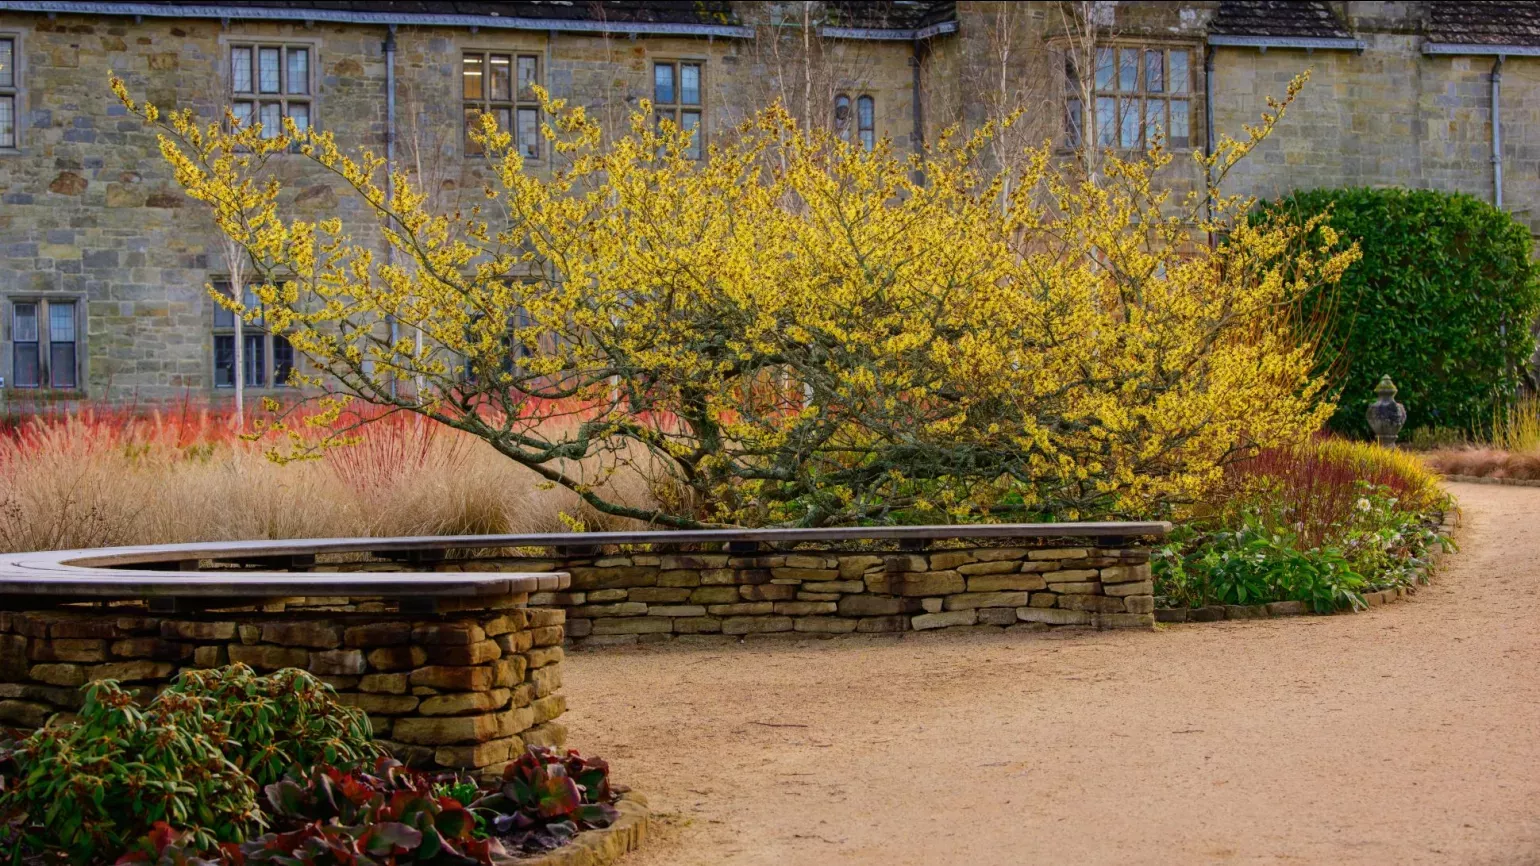 A curved bench in front of a yellow blossomed tree in front of a large stately manor